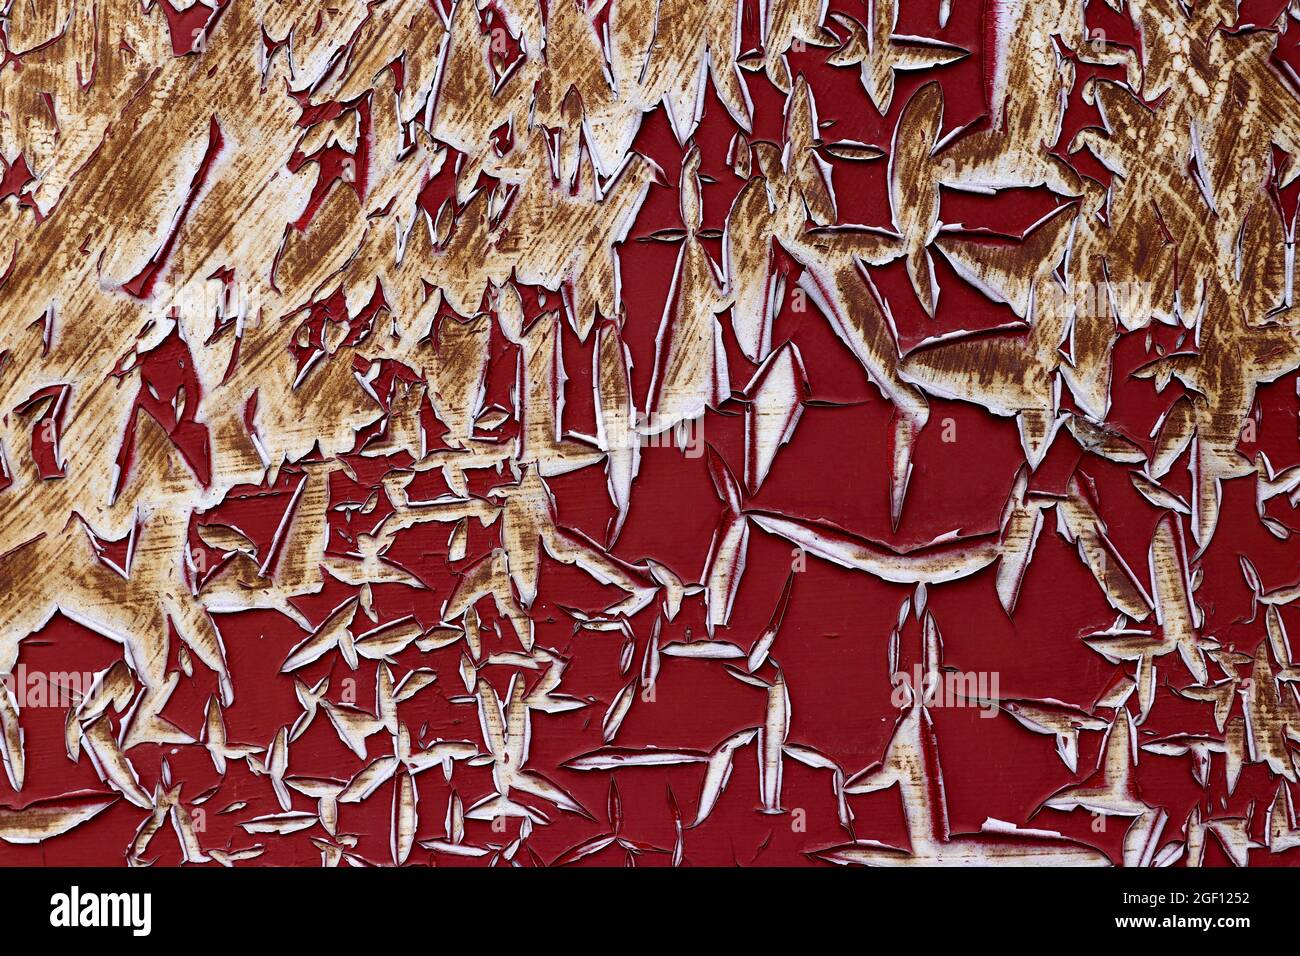 Detail of the cracked and peeled paint on the iron surface Stock Photo